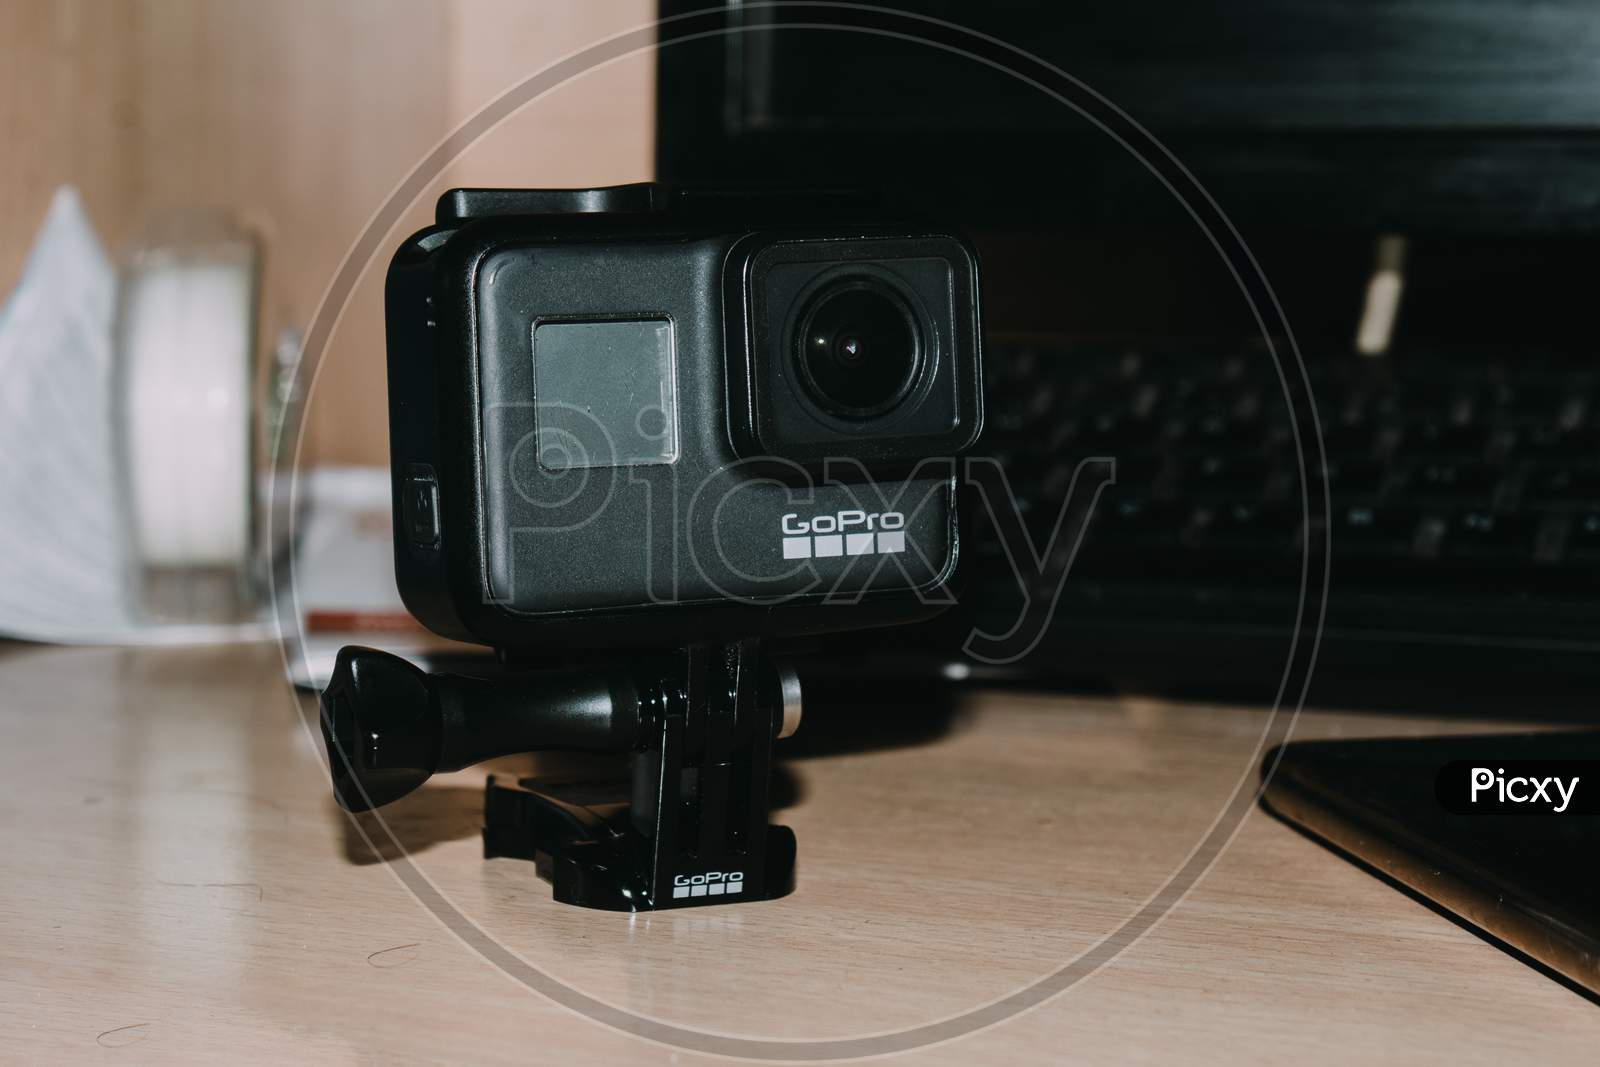 Delhi, India - April 30 2020: Action Camera In Mount Stand Clipping Clamp On Table, Gopro Hero 7 Black